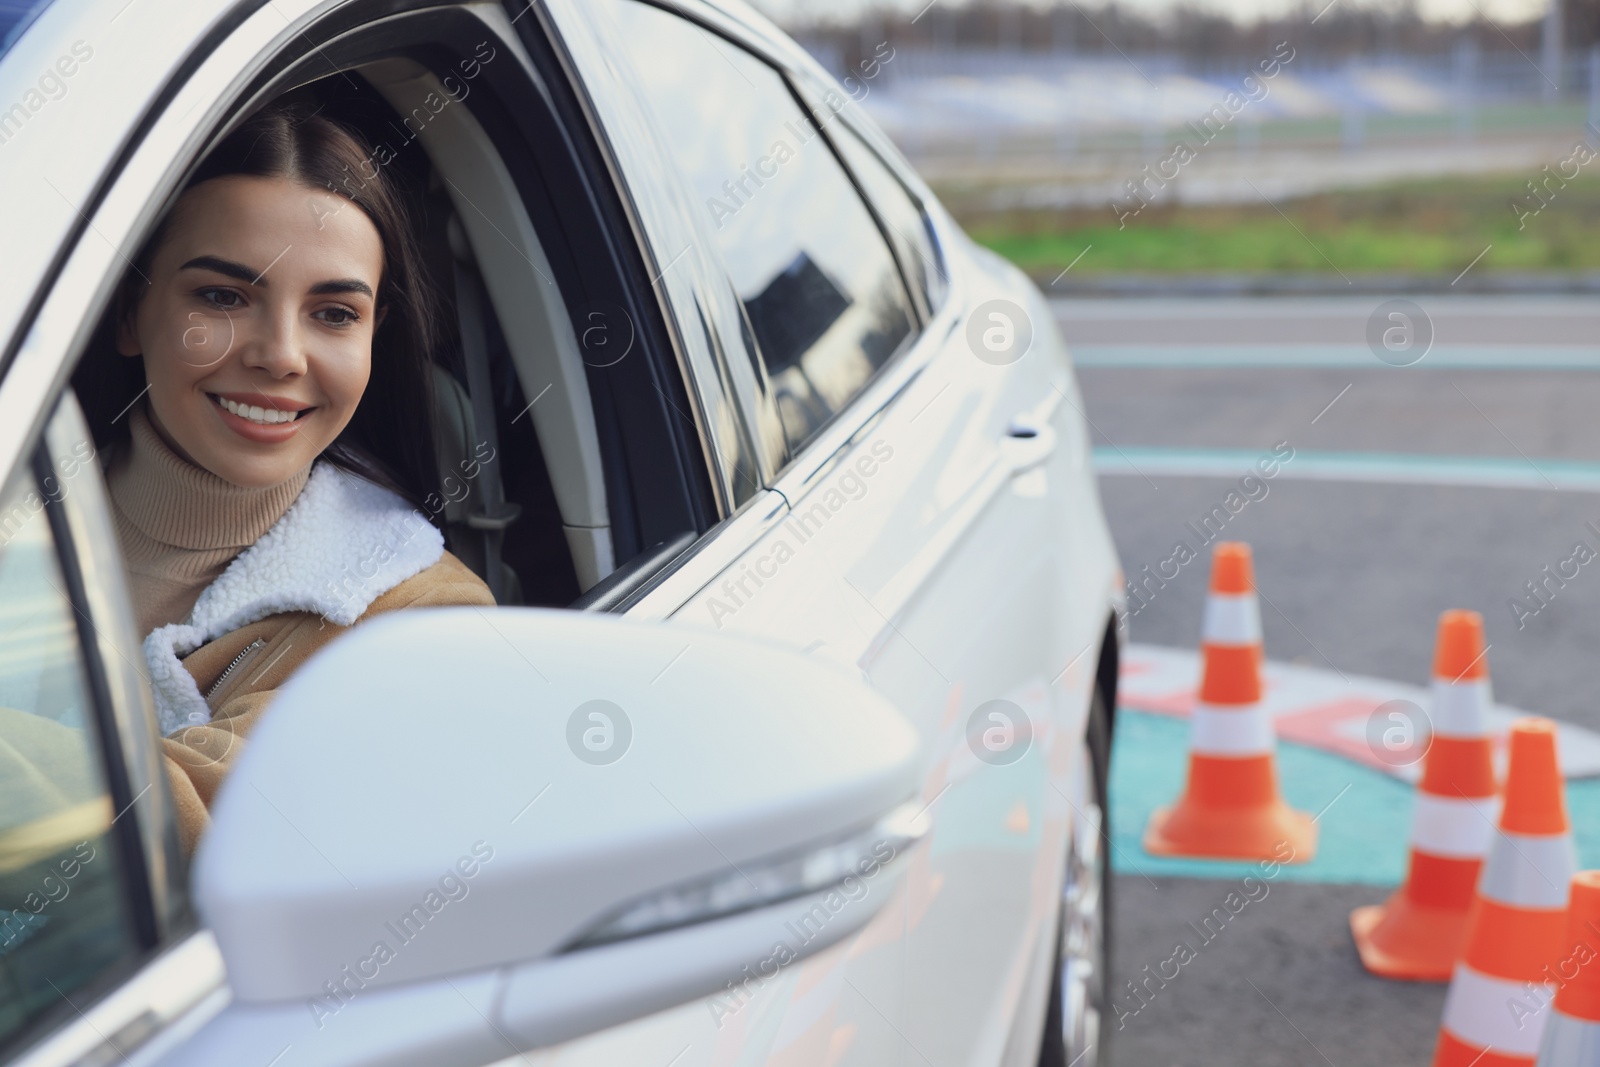 Photo of Young woman in car on test track with traffic cones. Driving school